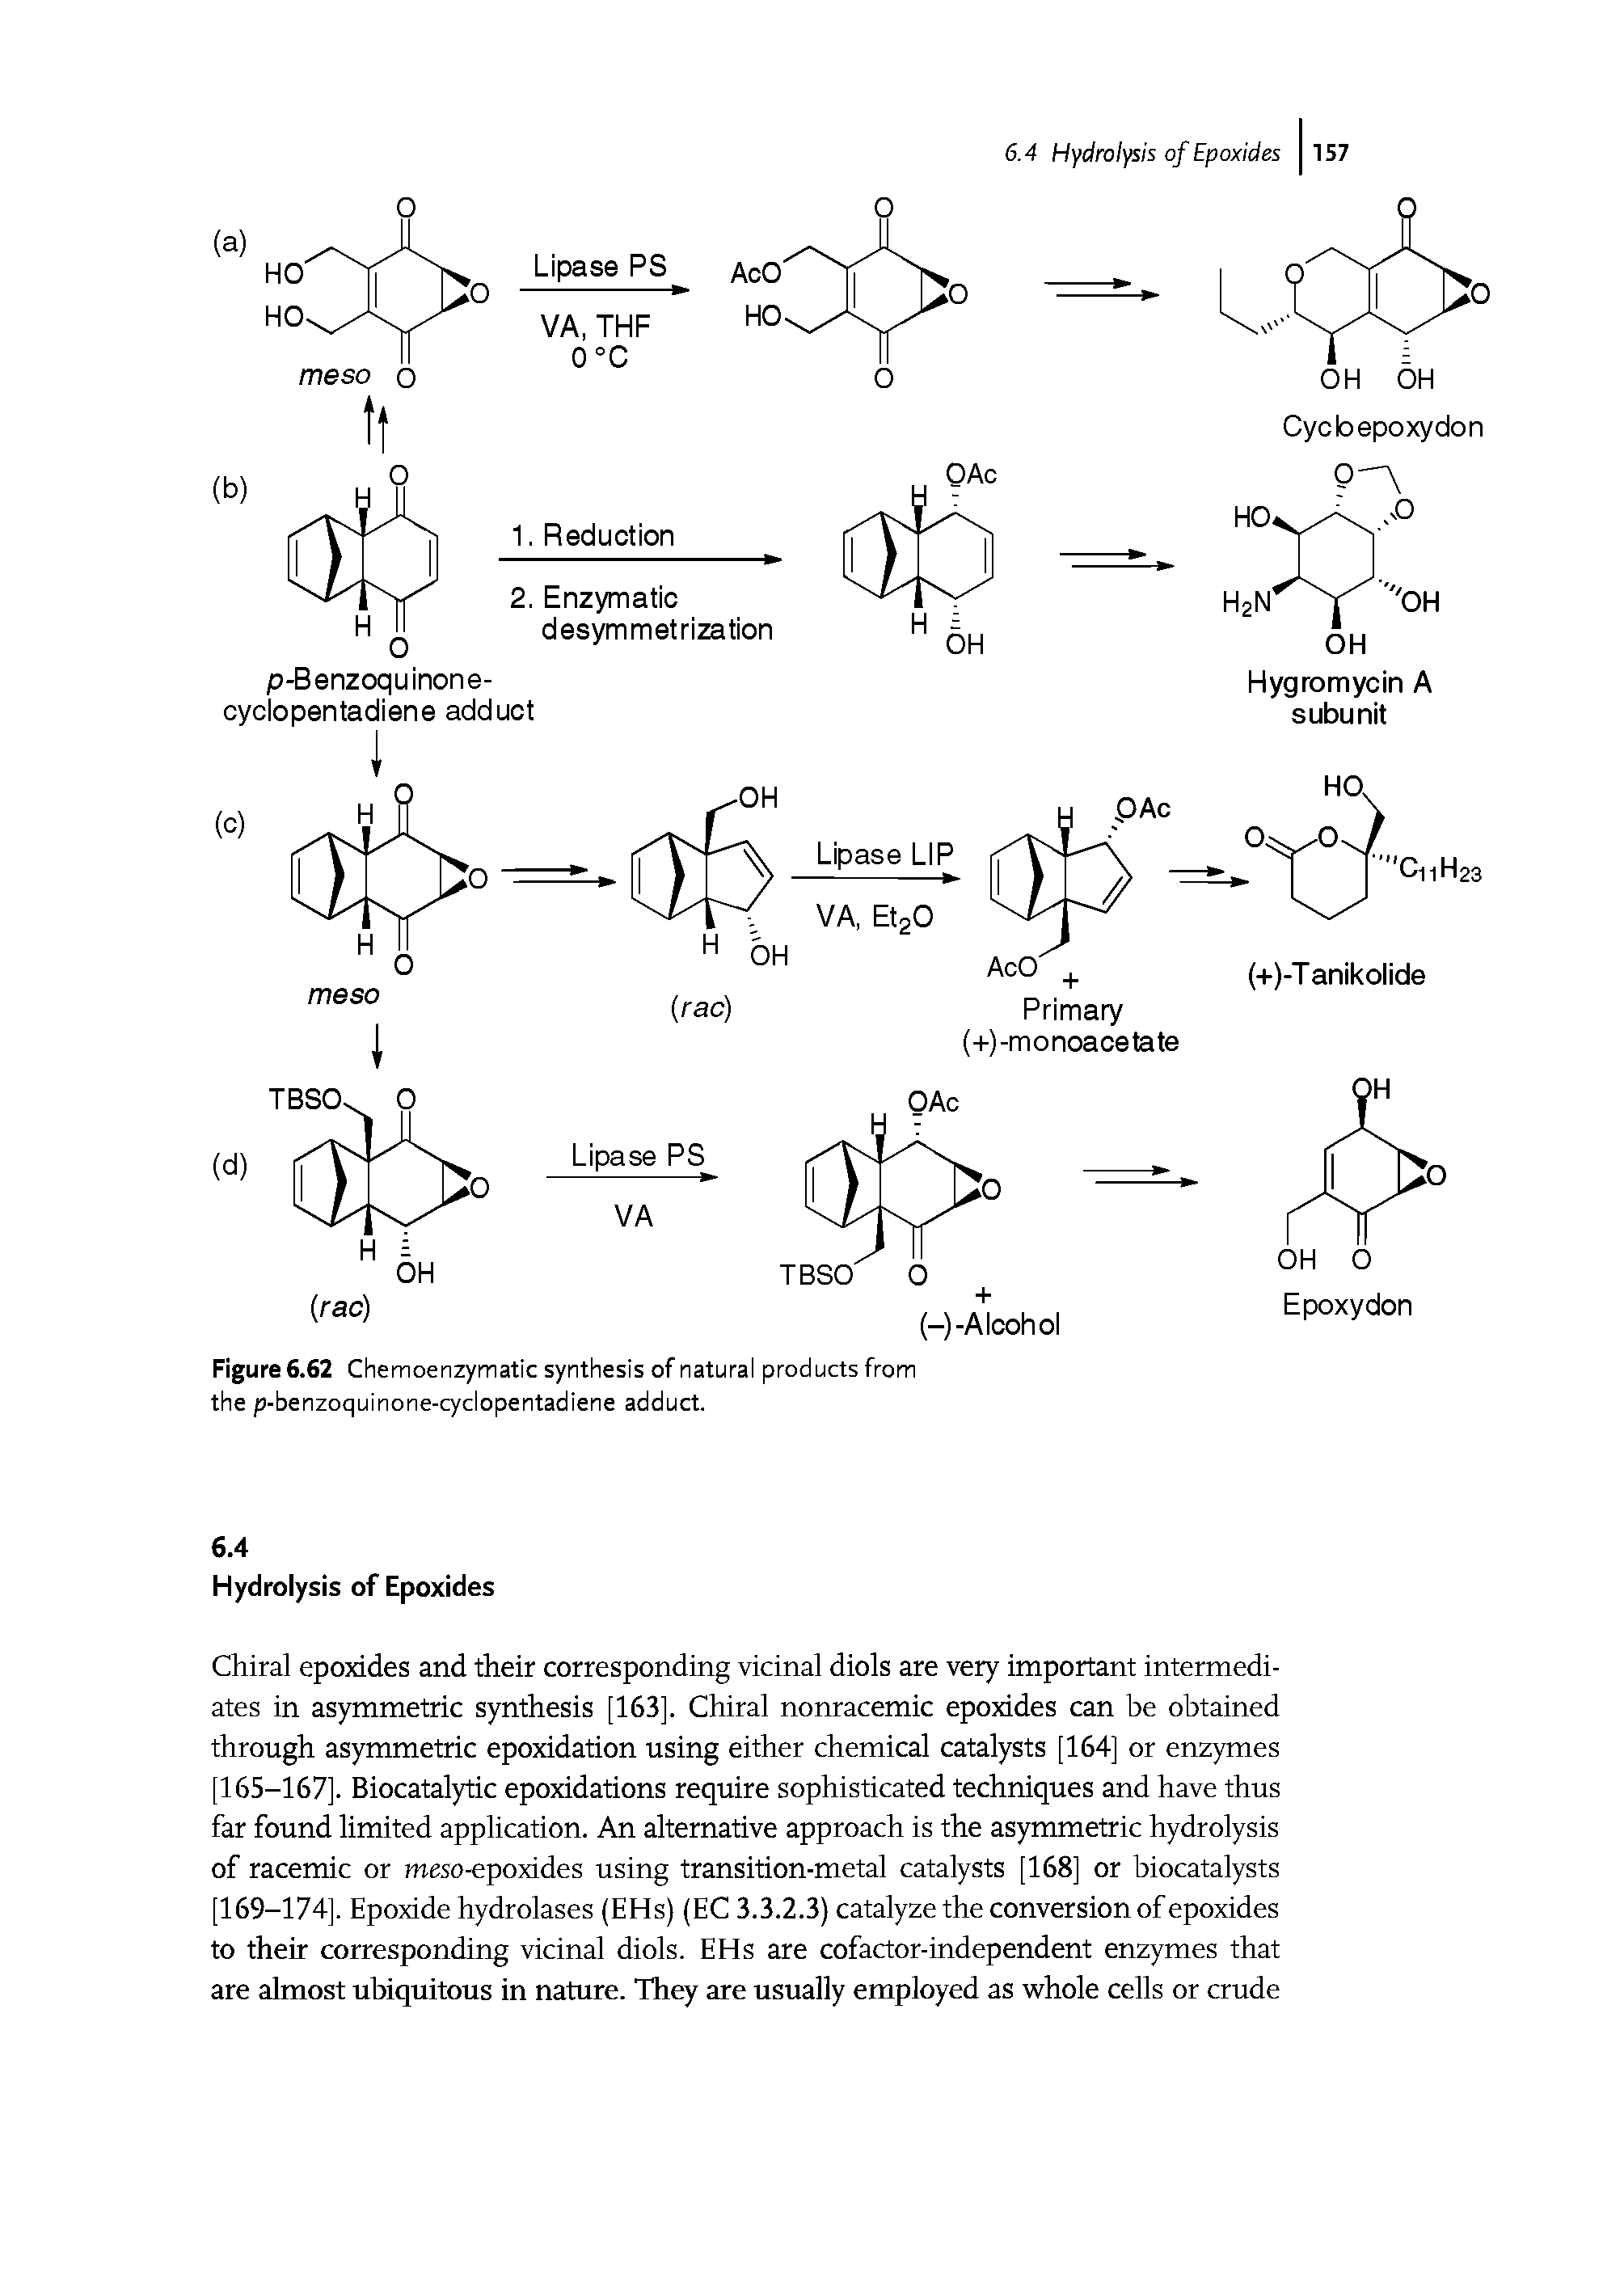 Figure 6.62 Chemoenzymatic synthesis of natural products from the p-benzoquinone-cyclopentadiene adduct.